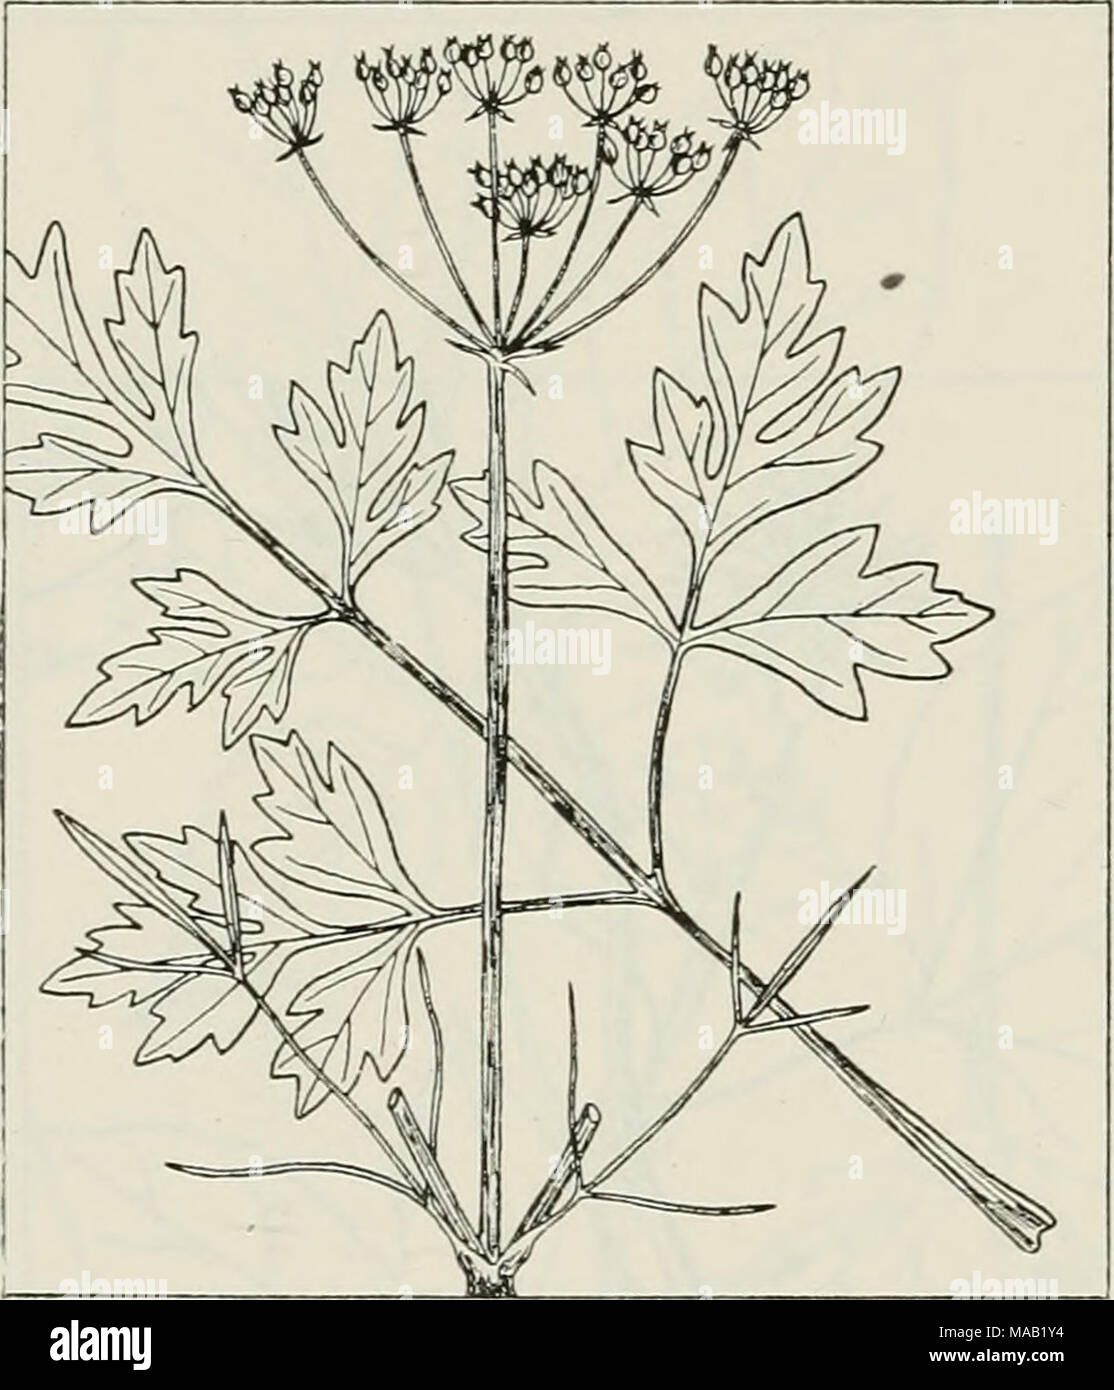 . The drug plants of Illinois . PETROSELINUM HORTENSE Hoffm. {P. sativum HoflFm.) Parsley. Umbelliferae. The seed and root collected. Grown in gardens; not known to have become estab- lished as an escape. Yields an oily resin (oleoresin of parsley seed) and apiol, the aromatic derivative from the resin. The seed is used as a car- minative, stimulant, and diuretic; apiol is used as an emmenagogue, ecbolic, and anti- pyretic. Stock Photo